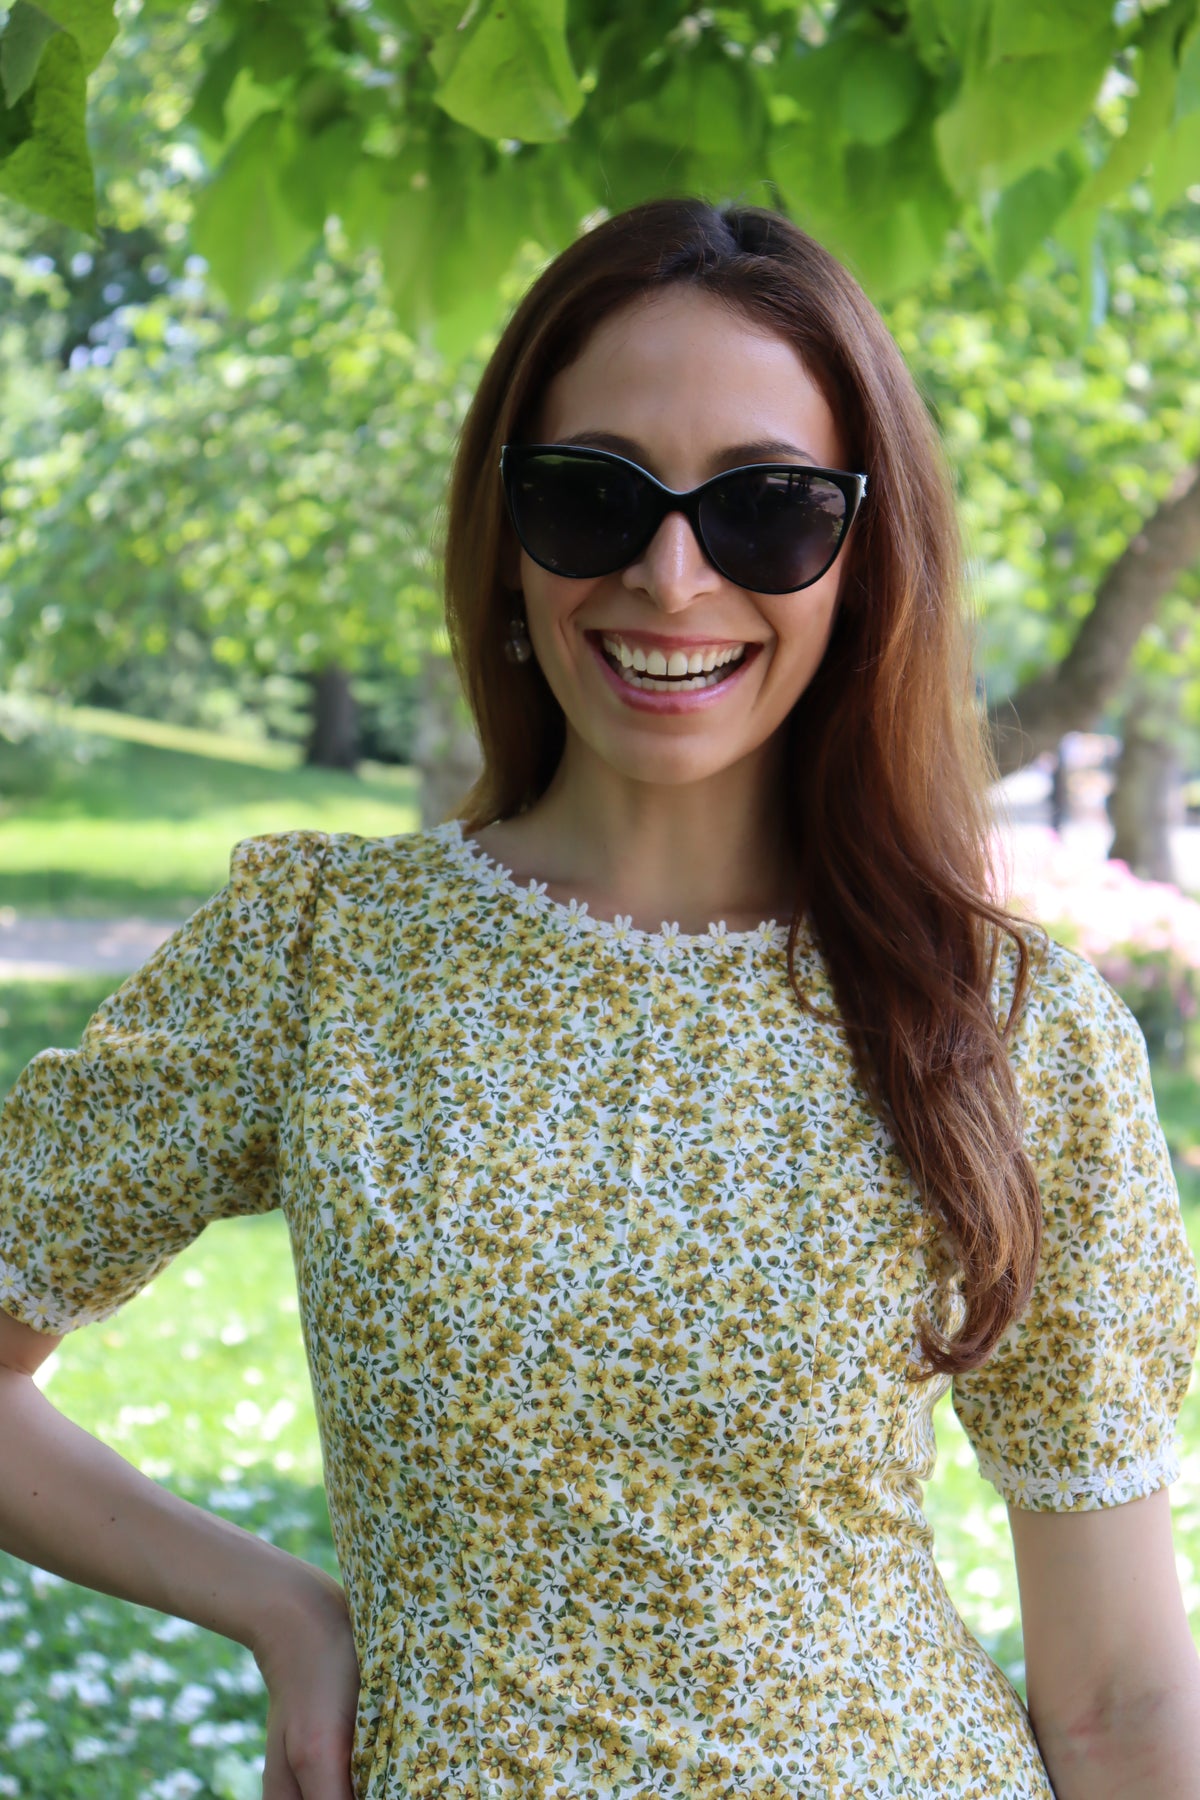 Photo of a model showing the detail of the front neckline of a short yellow floral dress with short sleeves and white daisy trim .